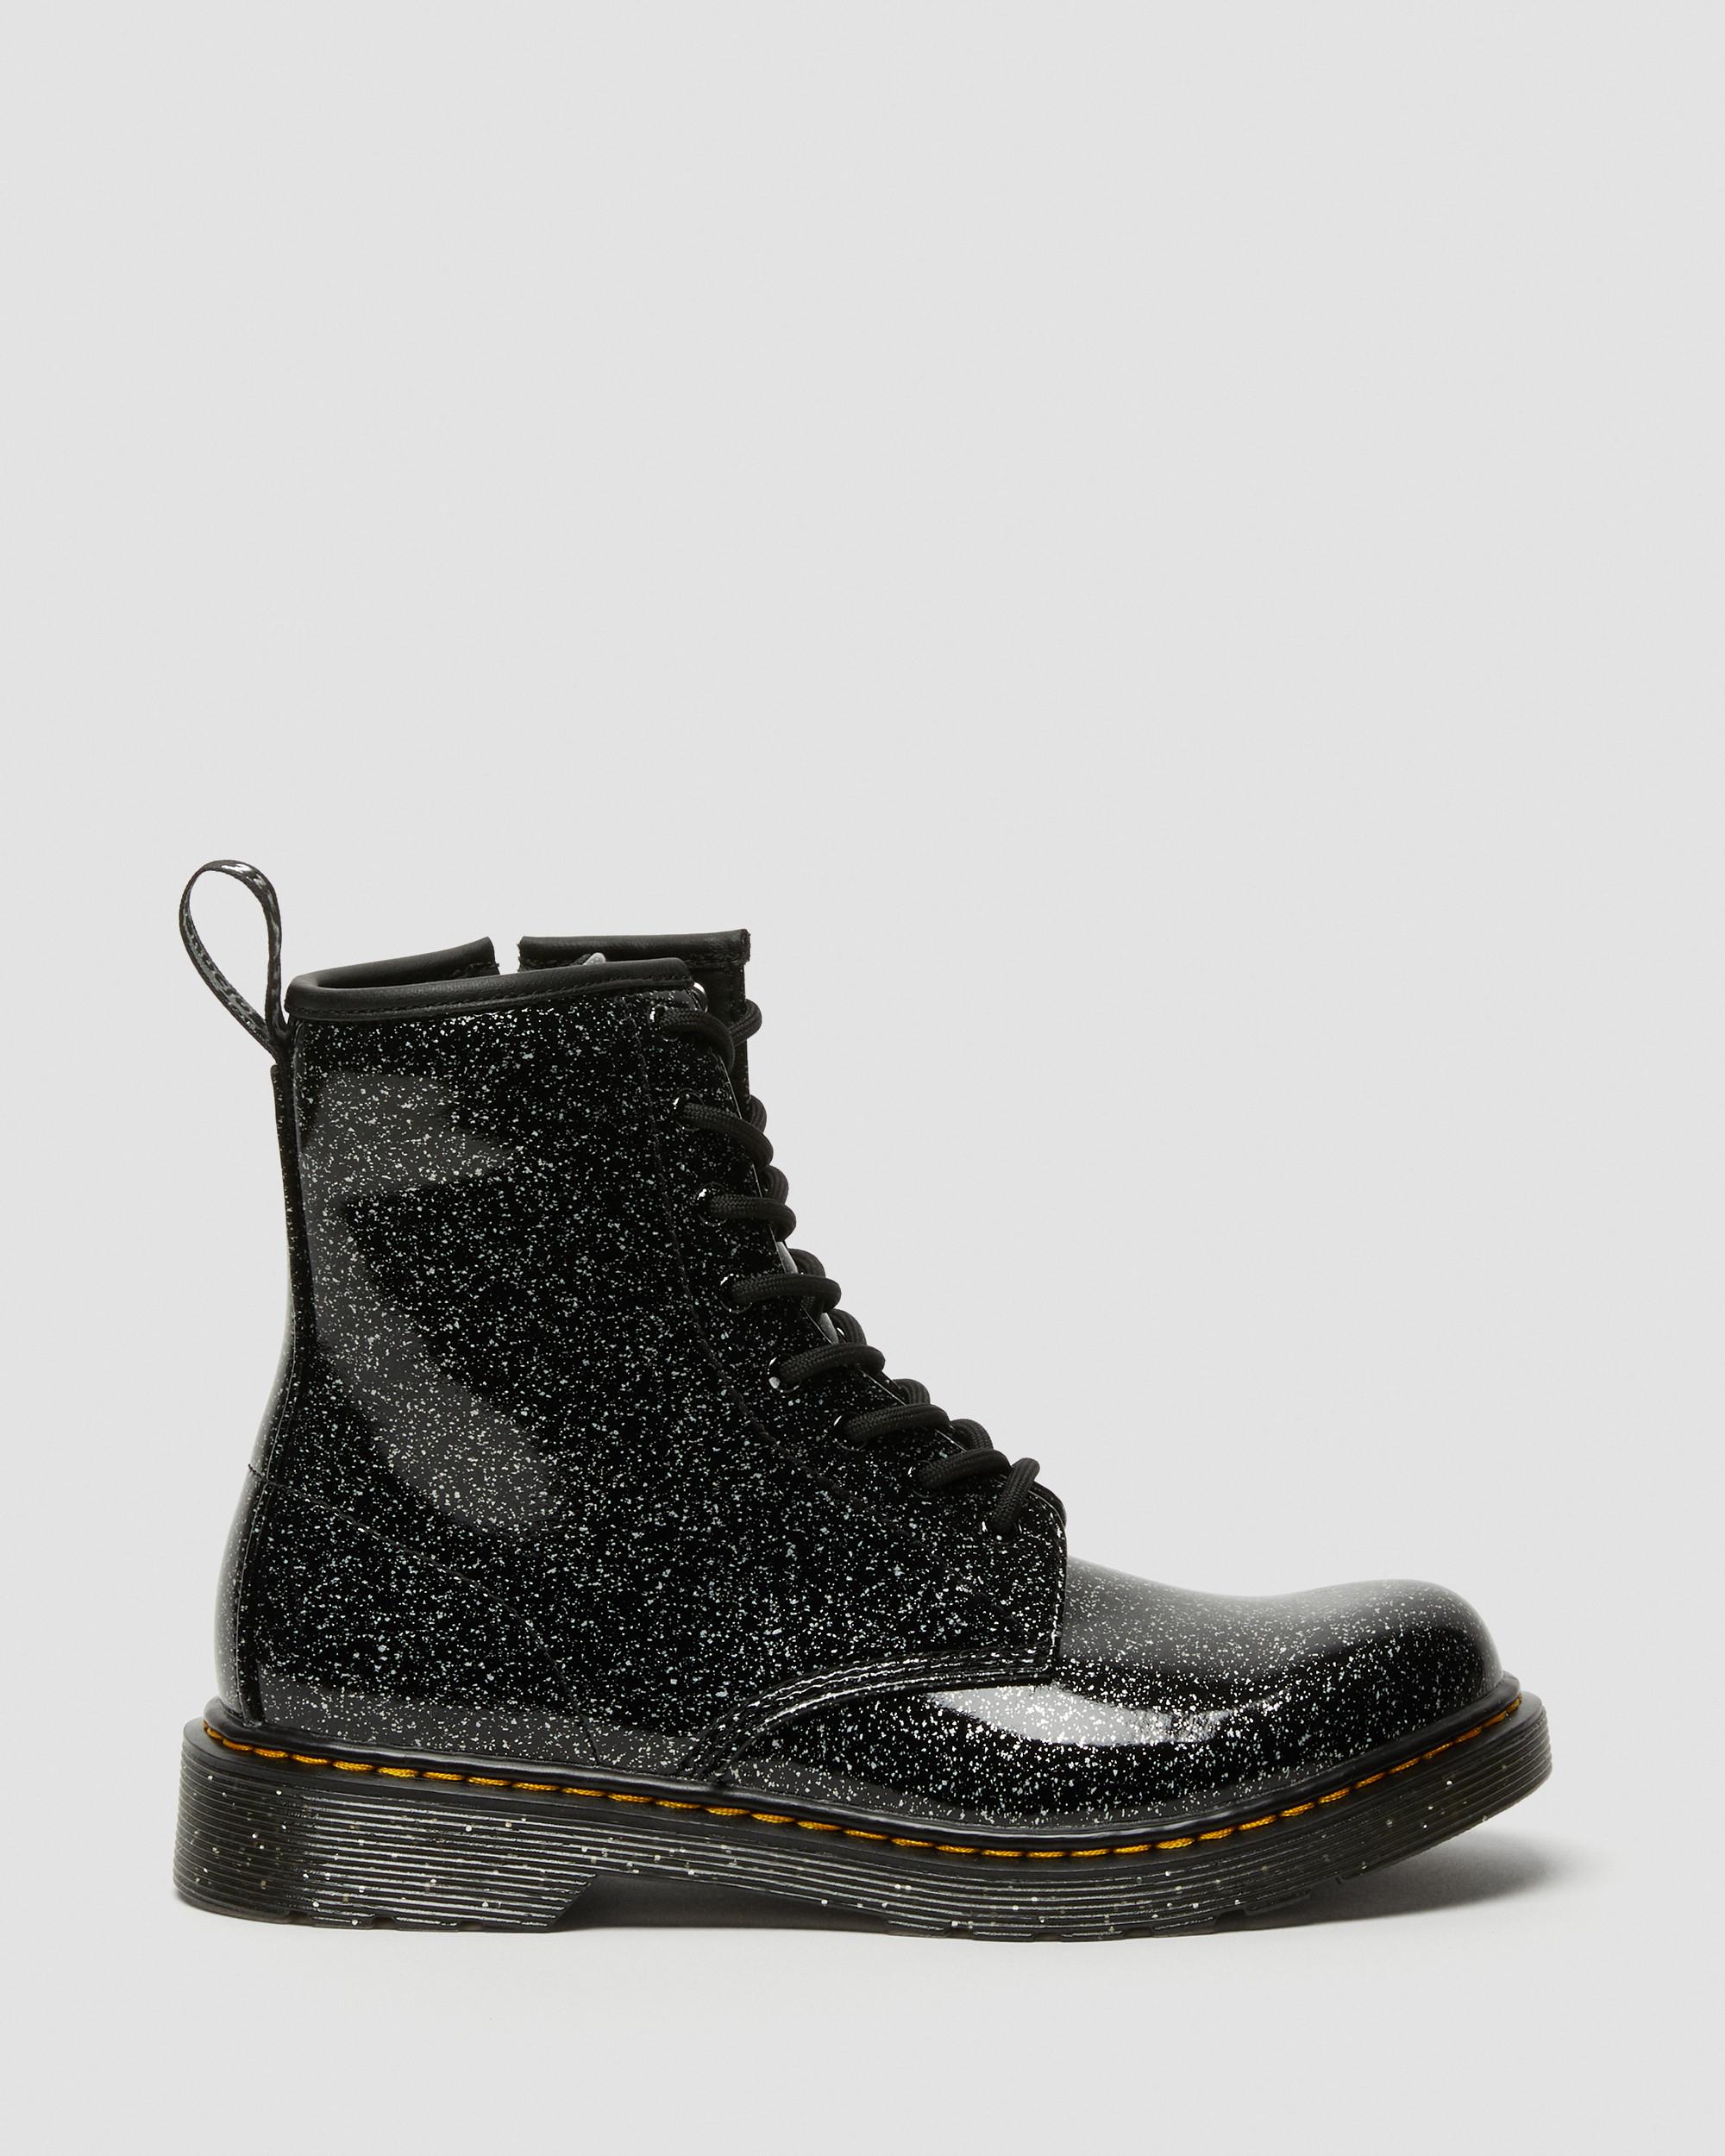 Youth 1460 Dr. Up Black in Boots Lace Martens Glitter 